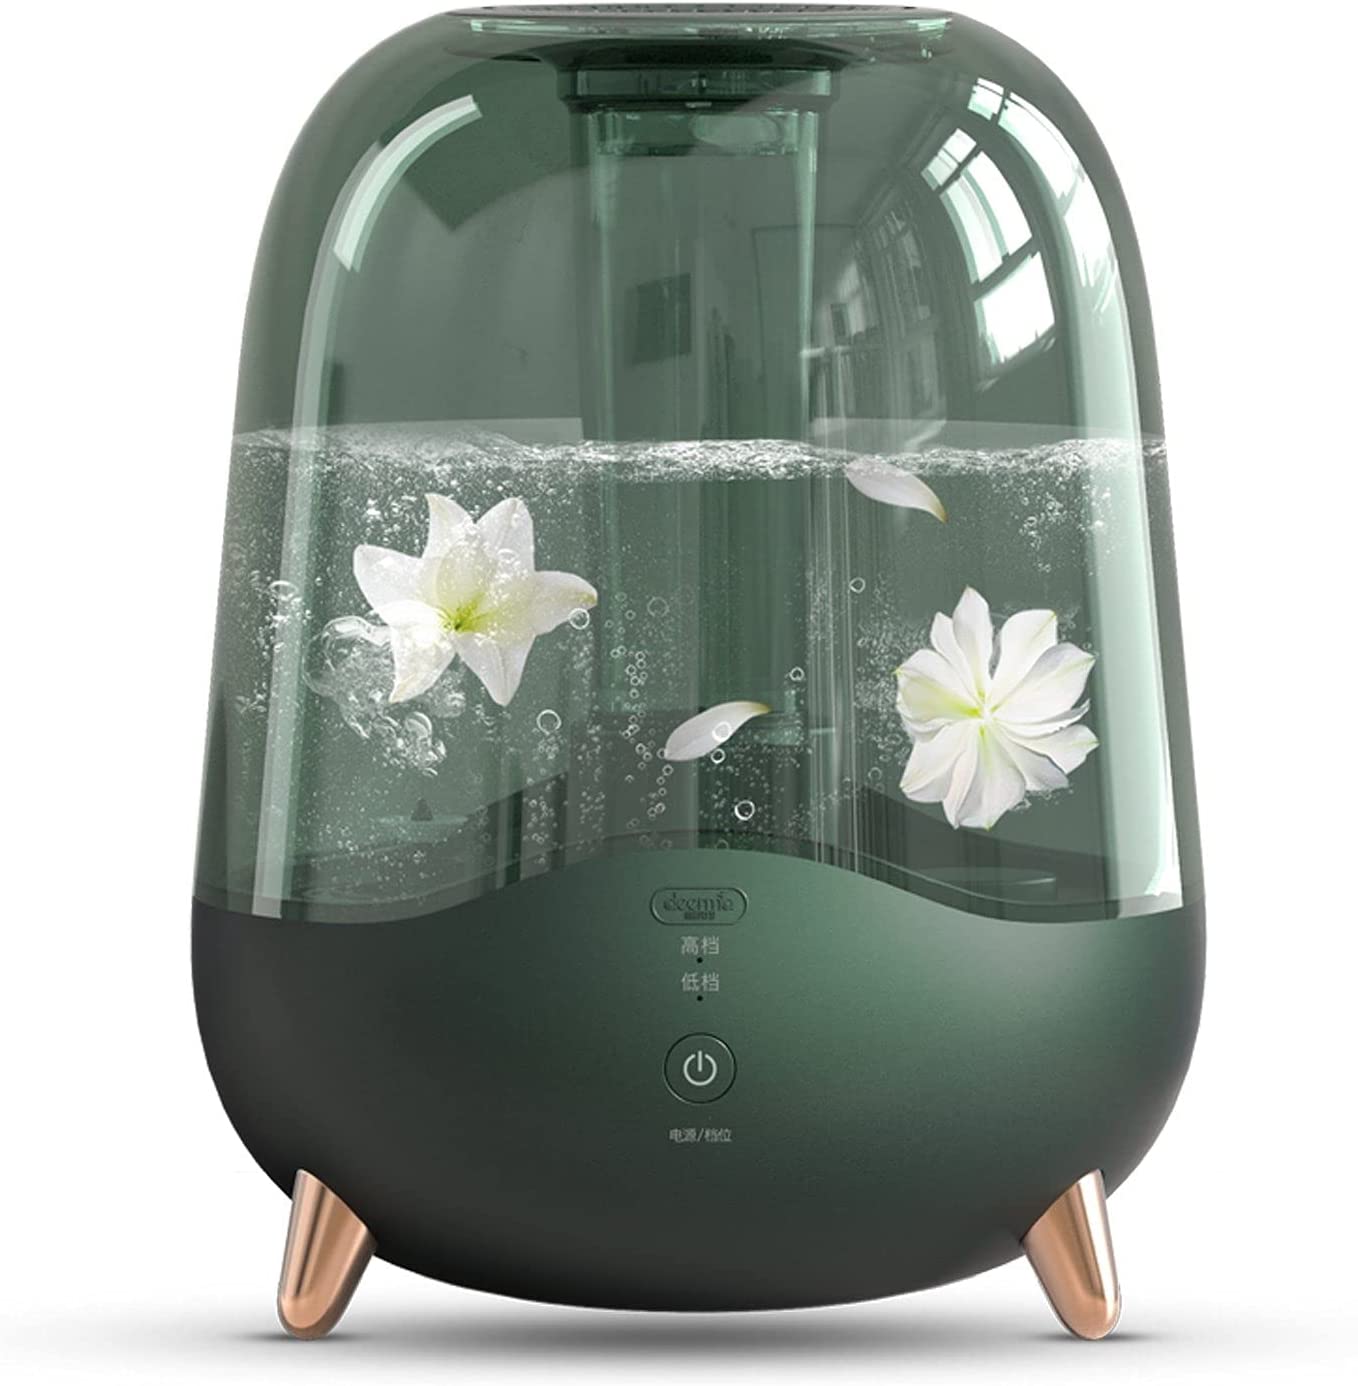 Deerma DEM F329 Air Humidifier 5L Household Silent Mini Aromatherapy Humidification Transparent Water Tank Office, Green